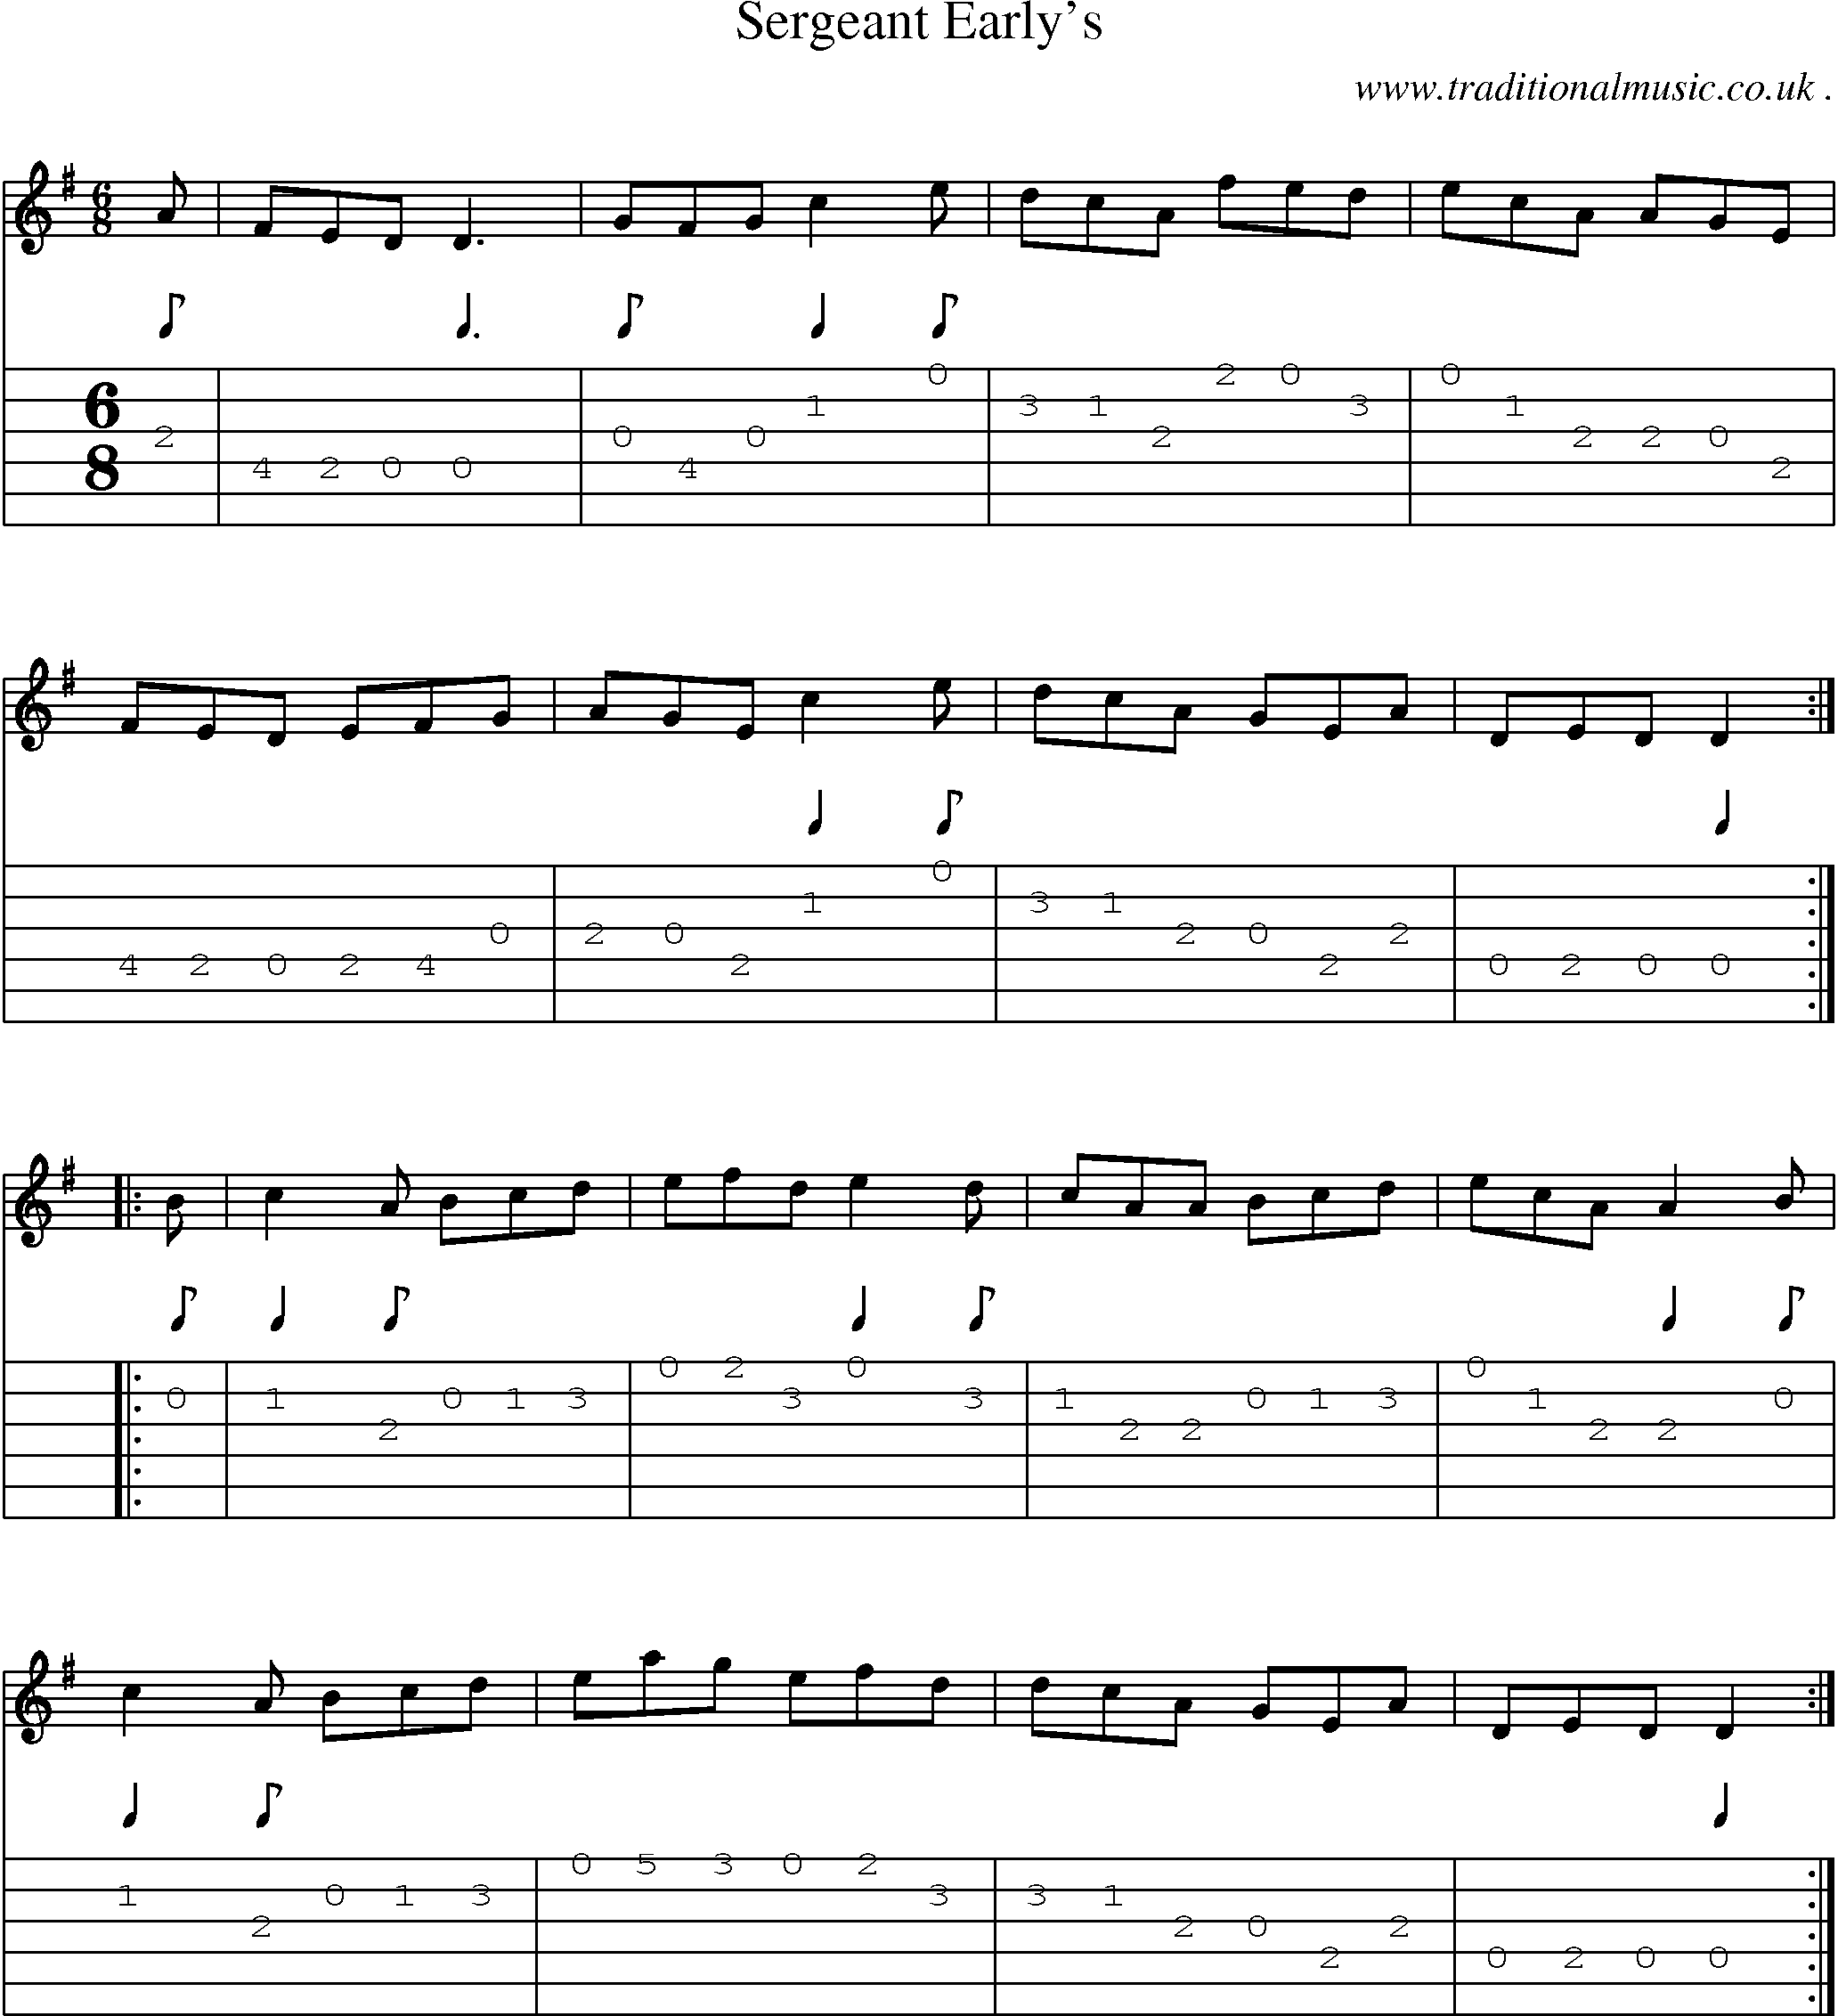 Sheet-Music and Guitar Tabs for Sergeant Earlys